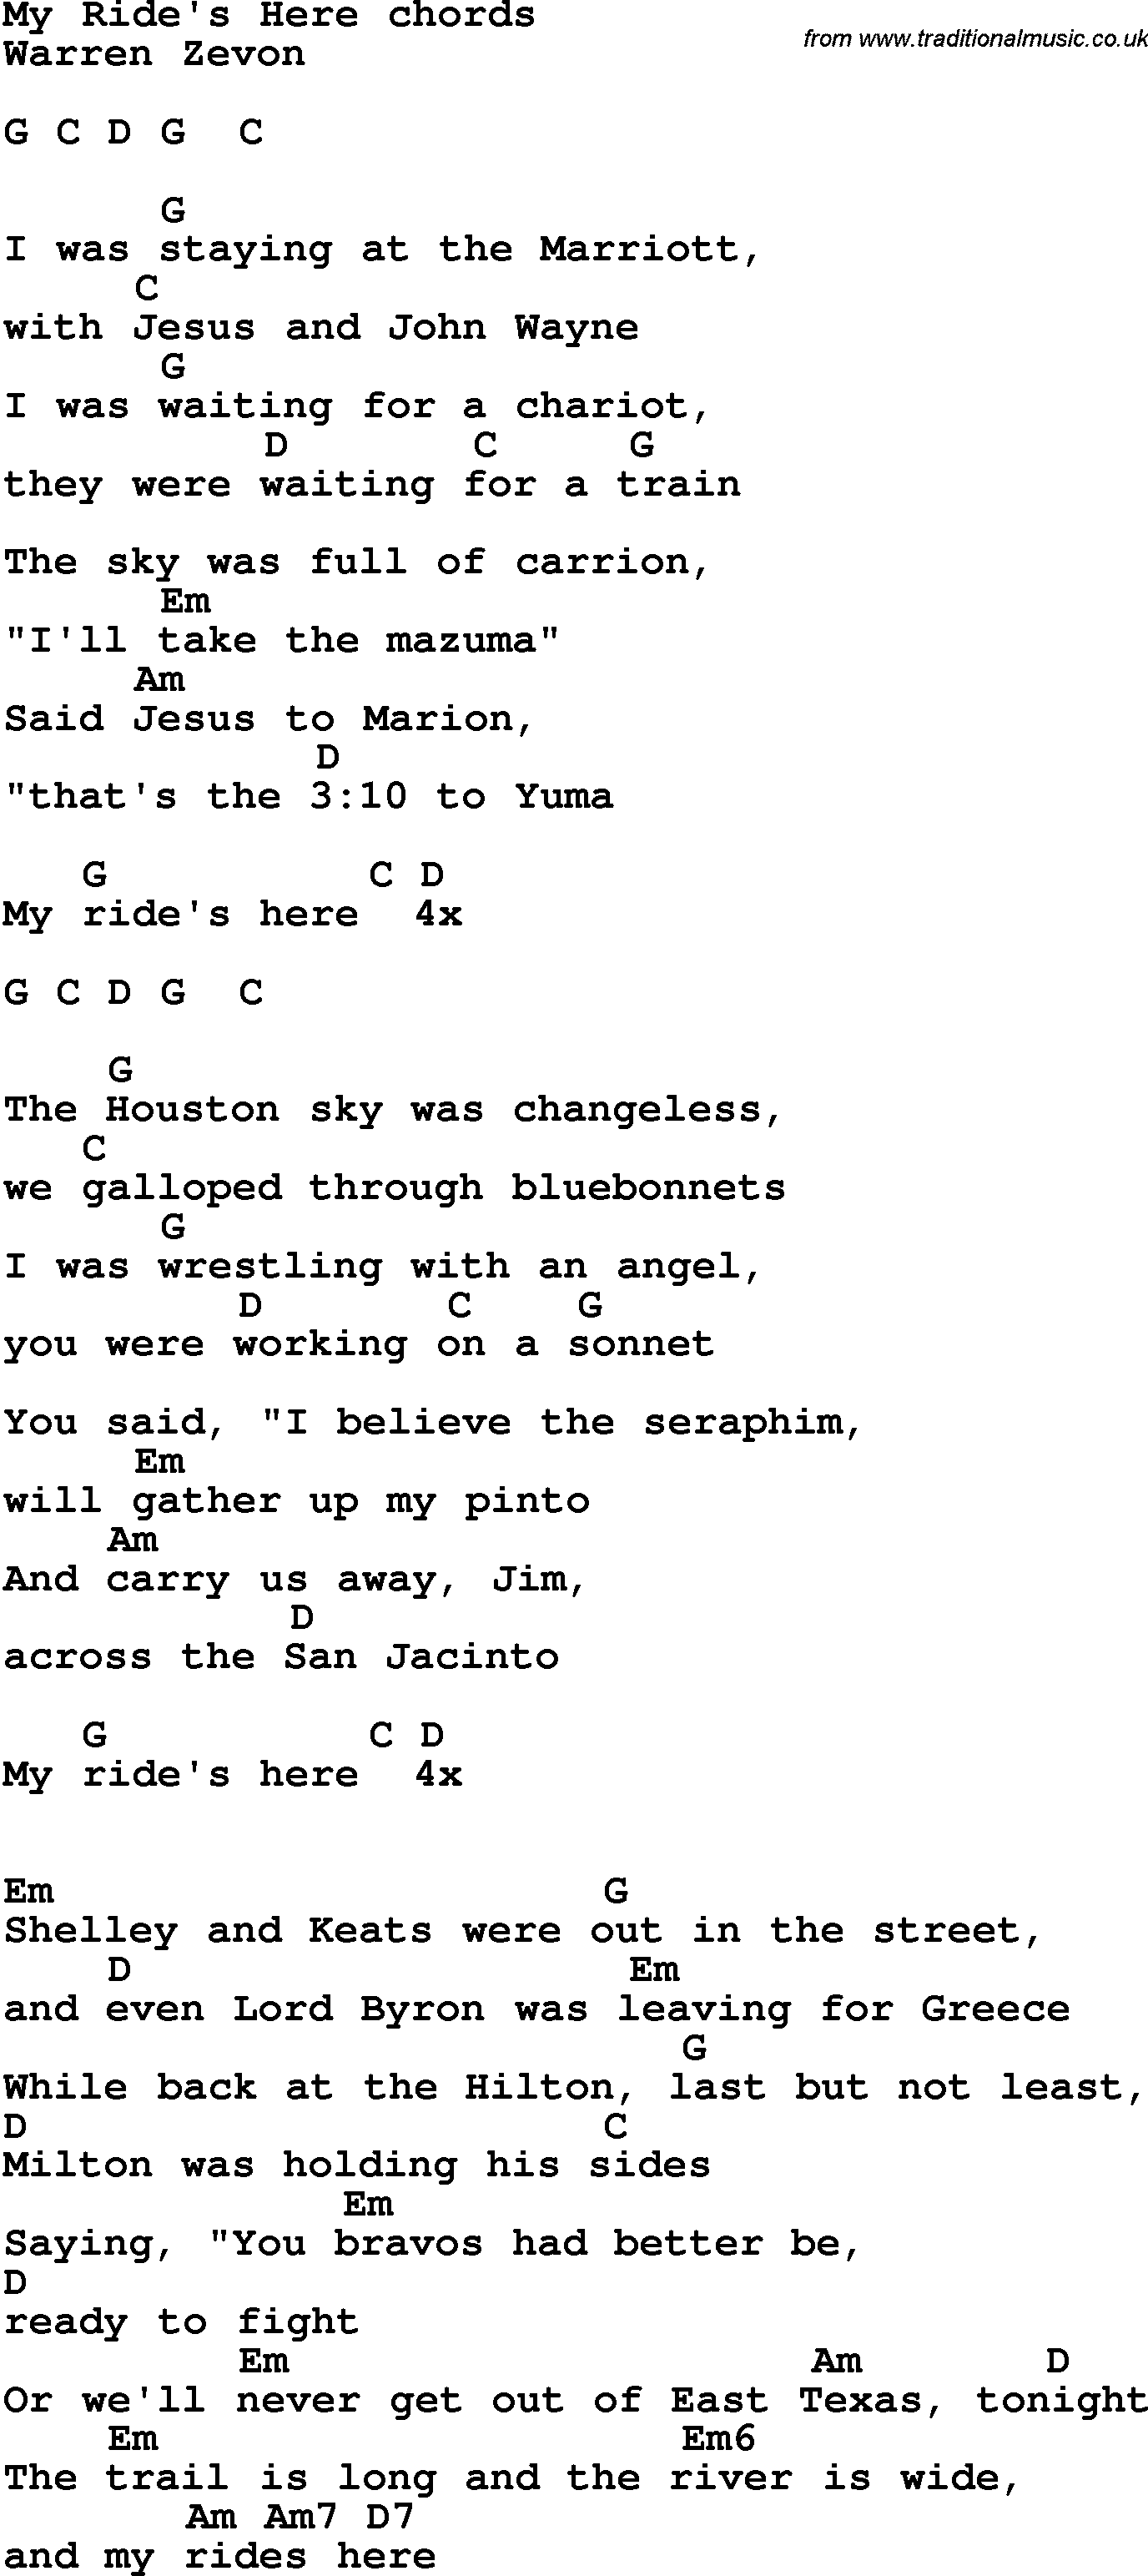 Song Lyrics with guitar chords for My Ride's Here